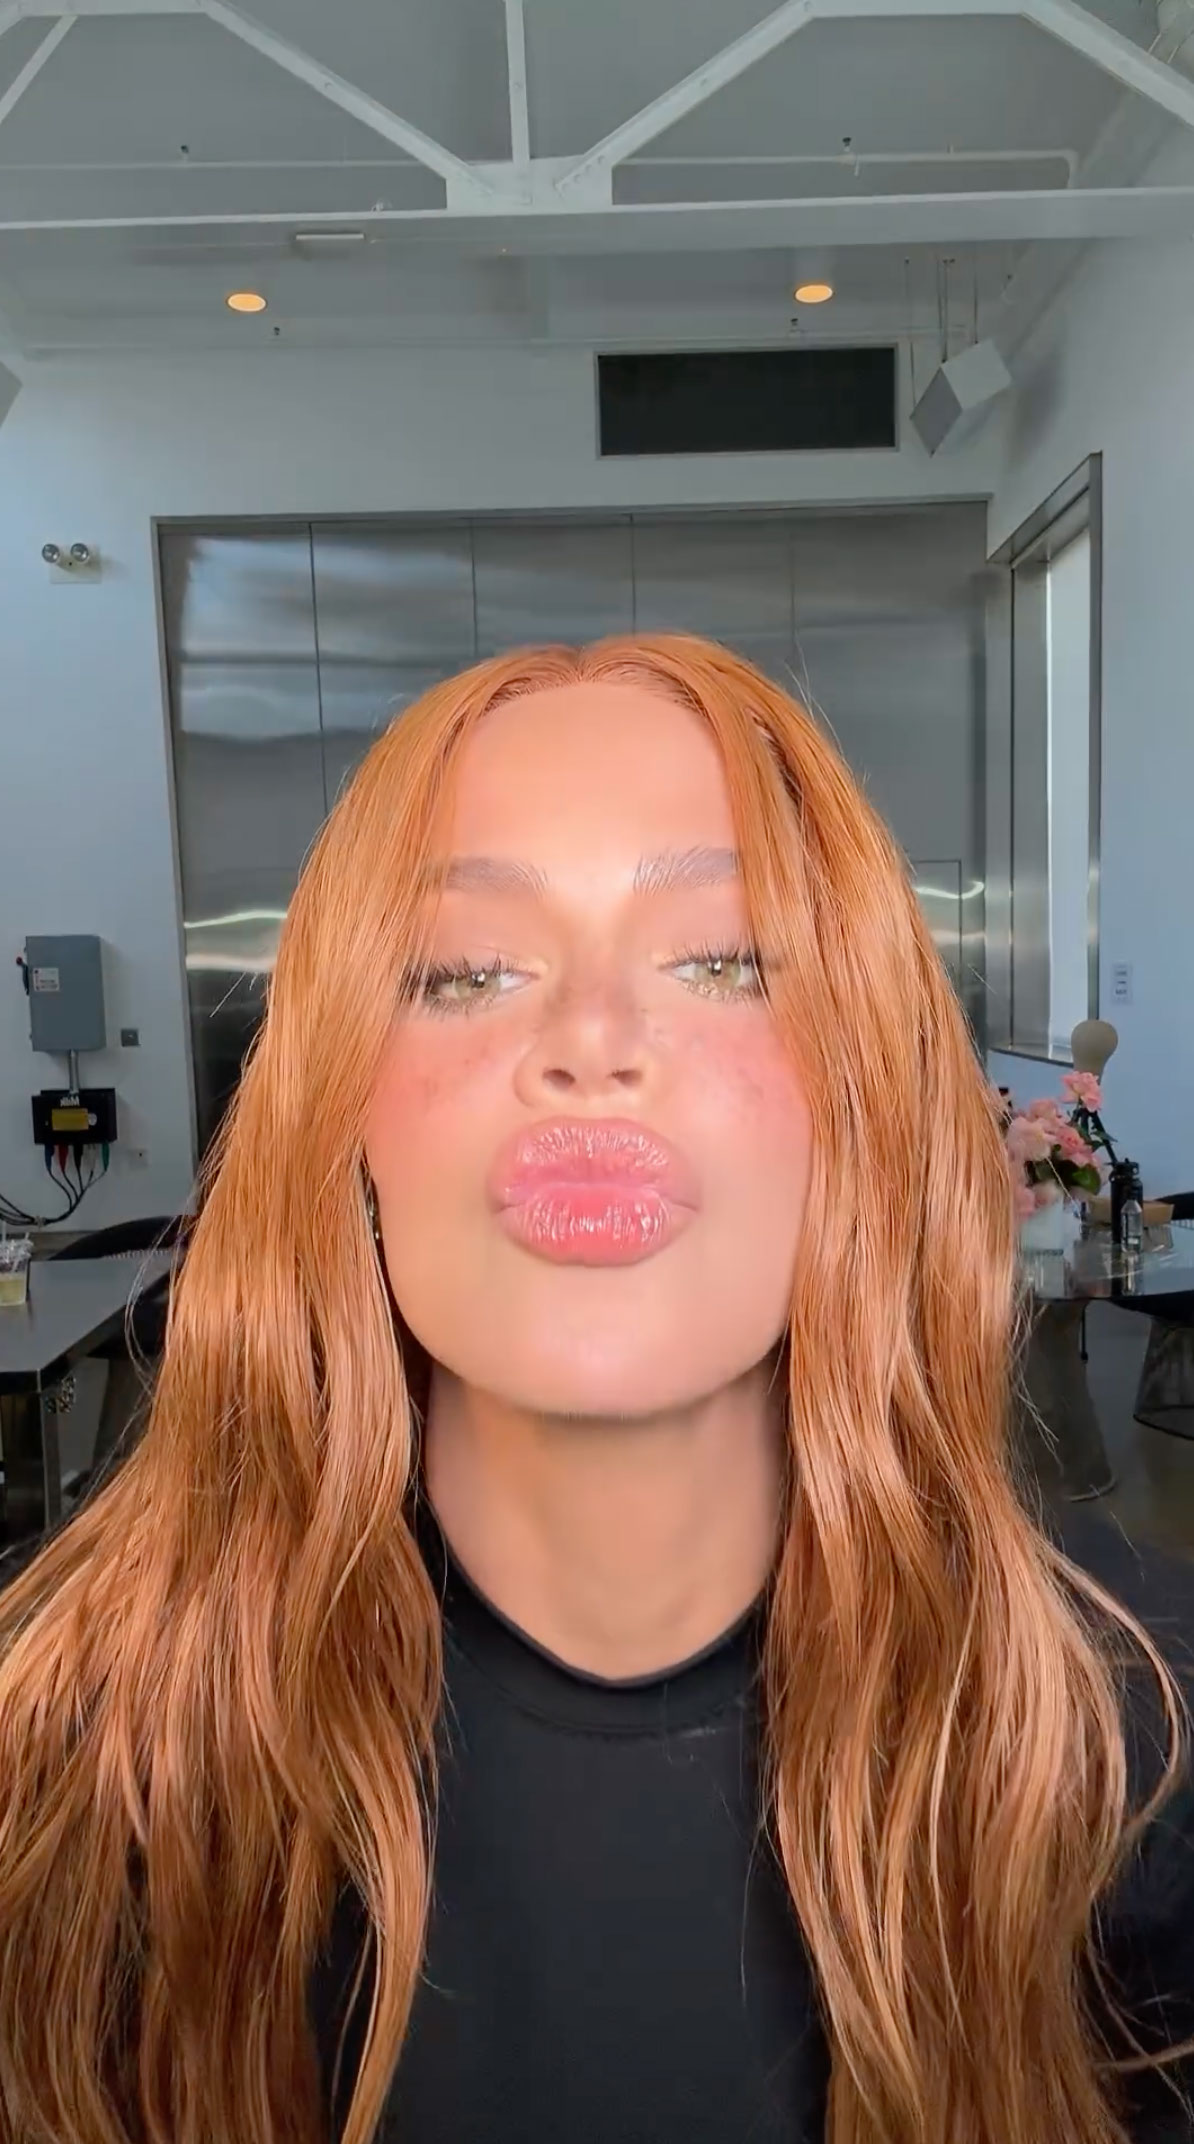 The Kardashian showed off her plump lips in the clip